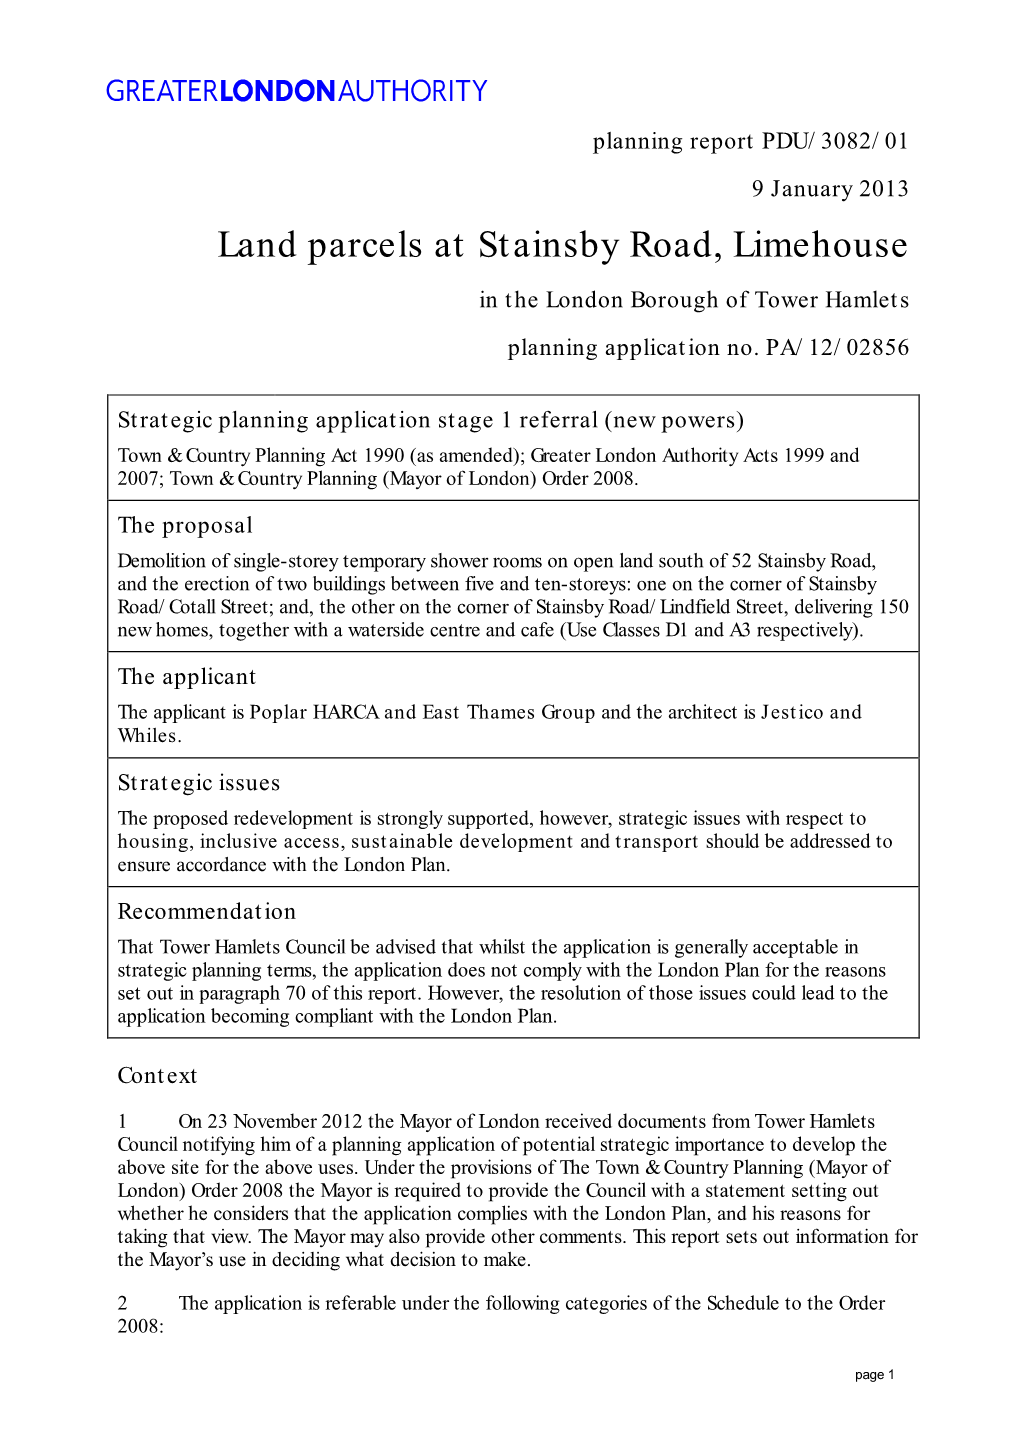 Land Parcels at Stainsby Road, Limehouse